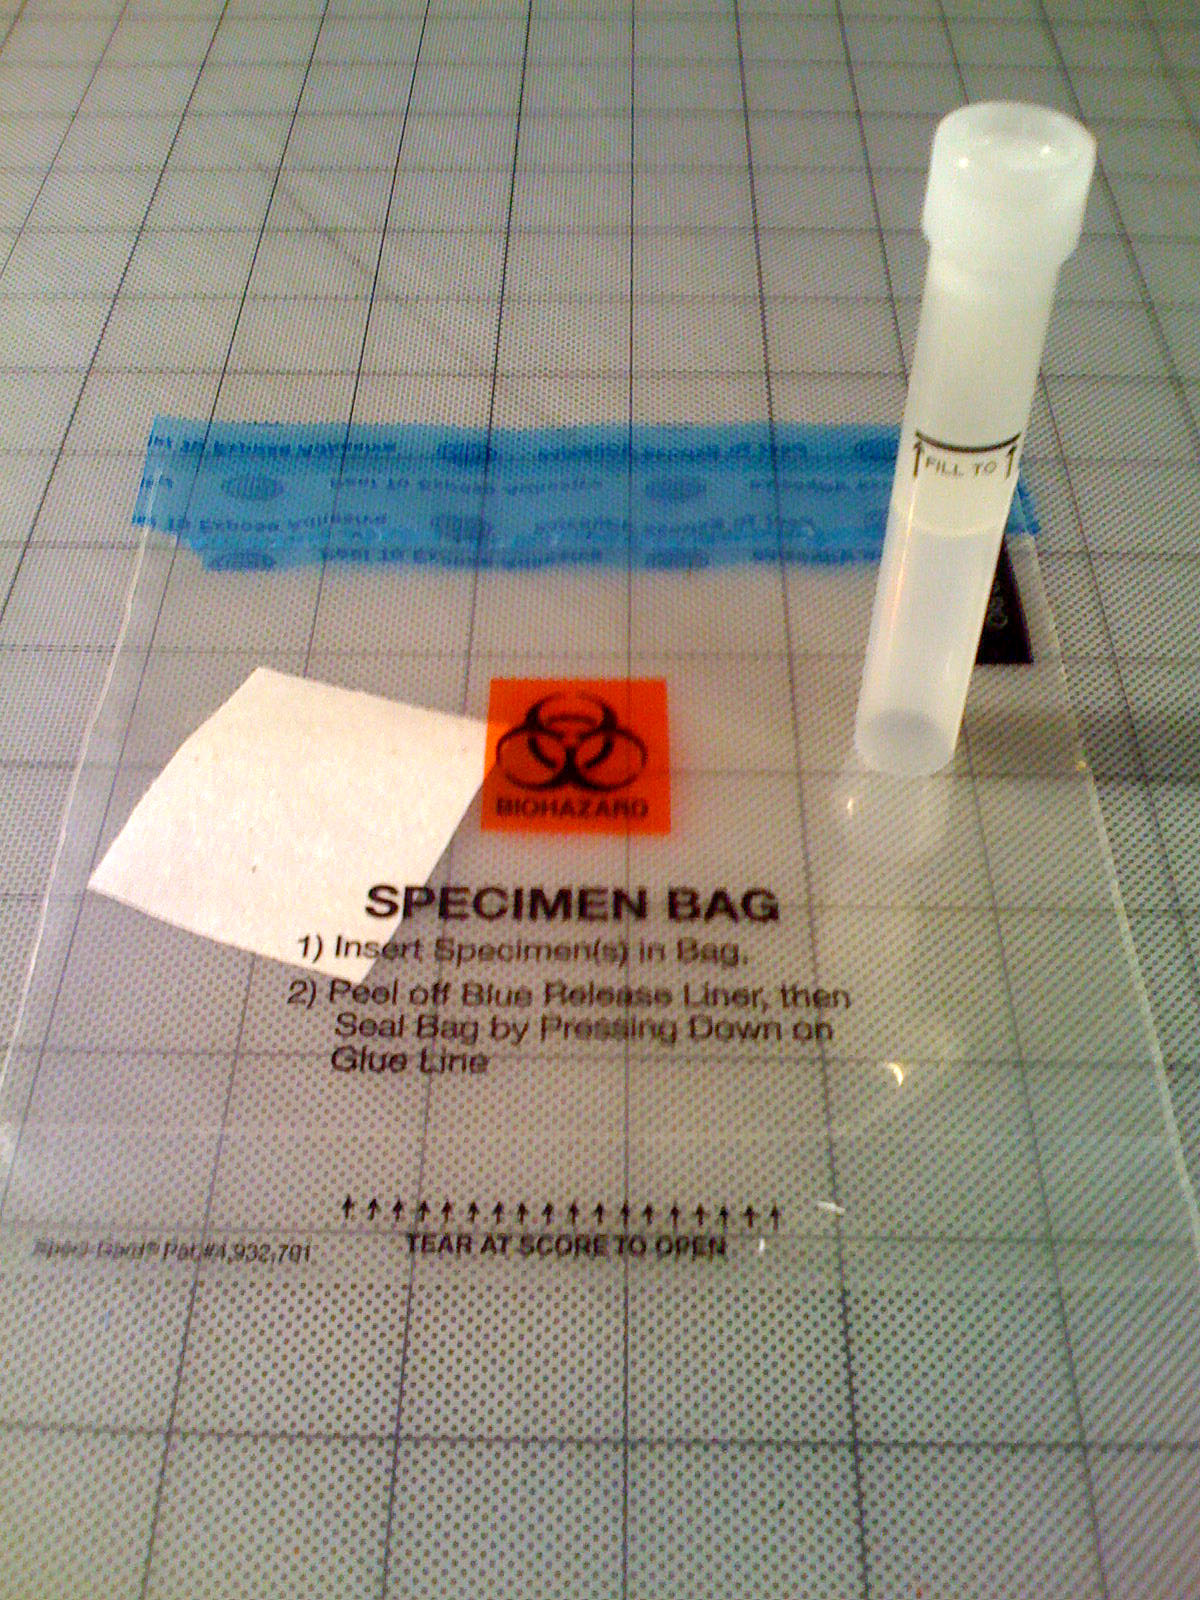 Contents of DNA spit kit, revealing a bio specimen bag and a tube container 